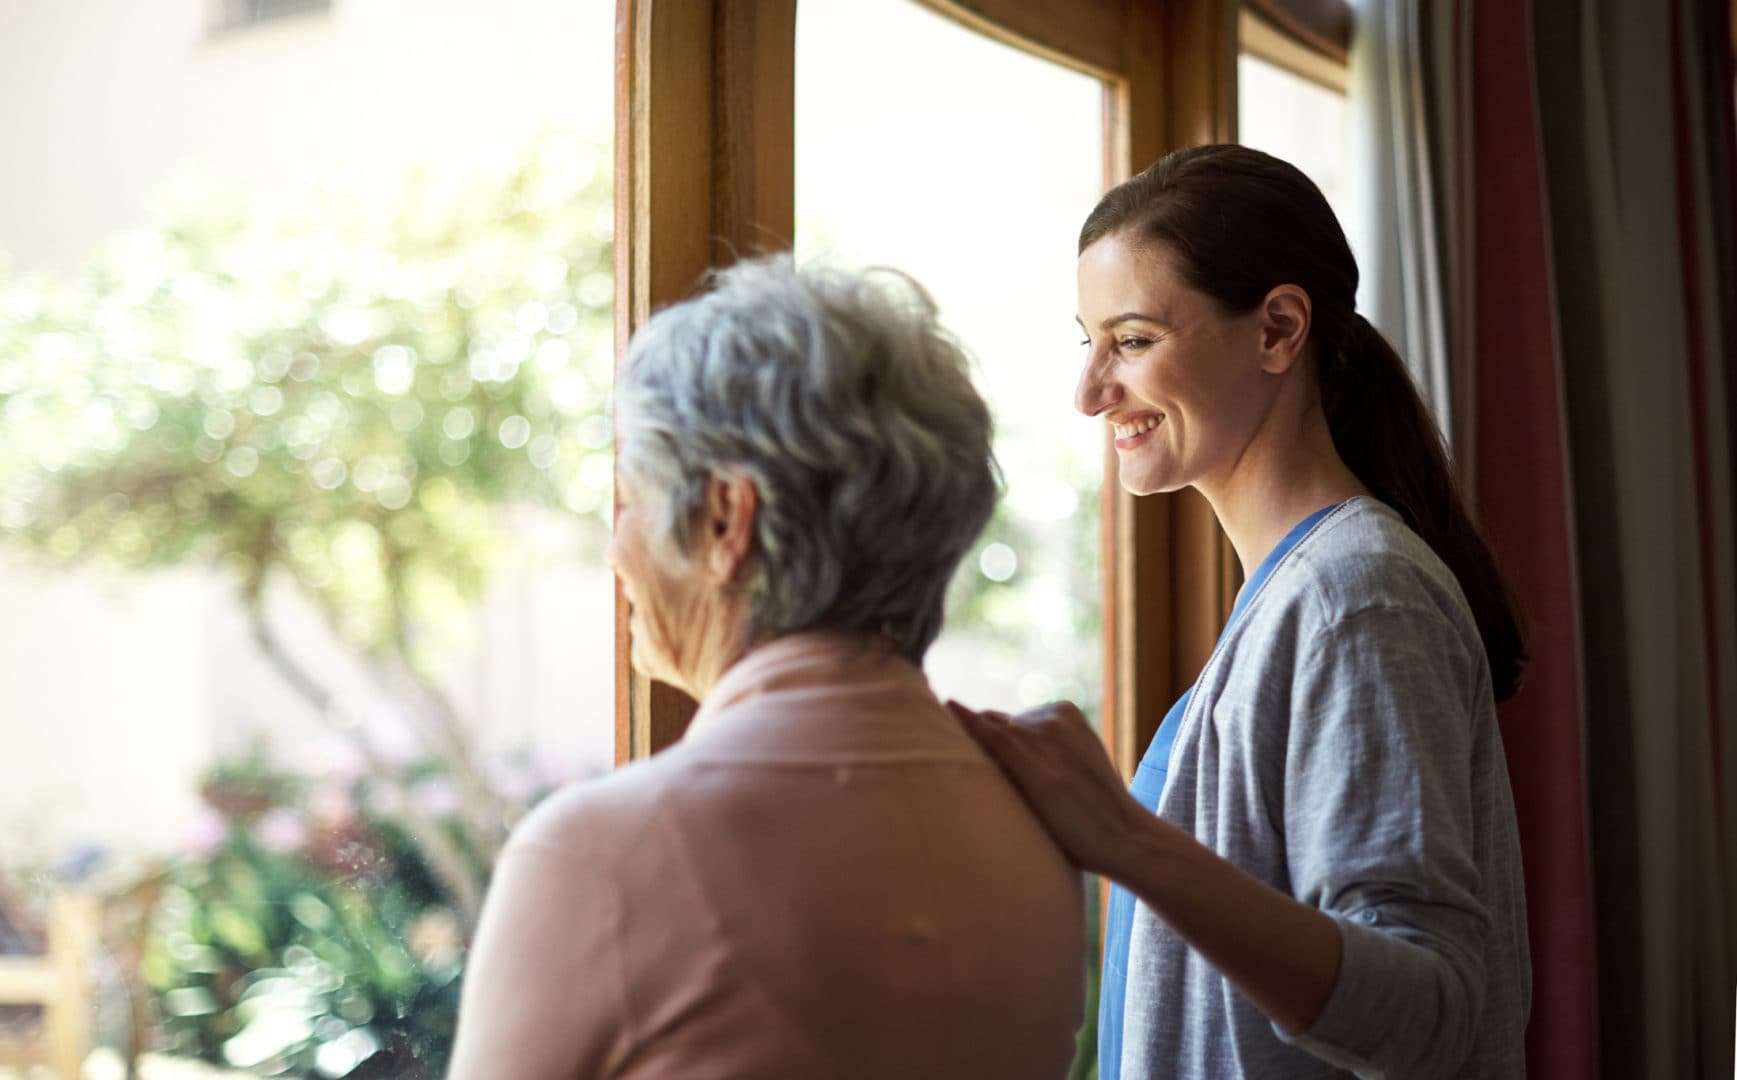 Questions to ask during an elderly caregiver interview